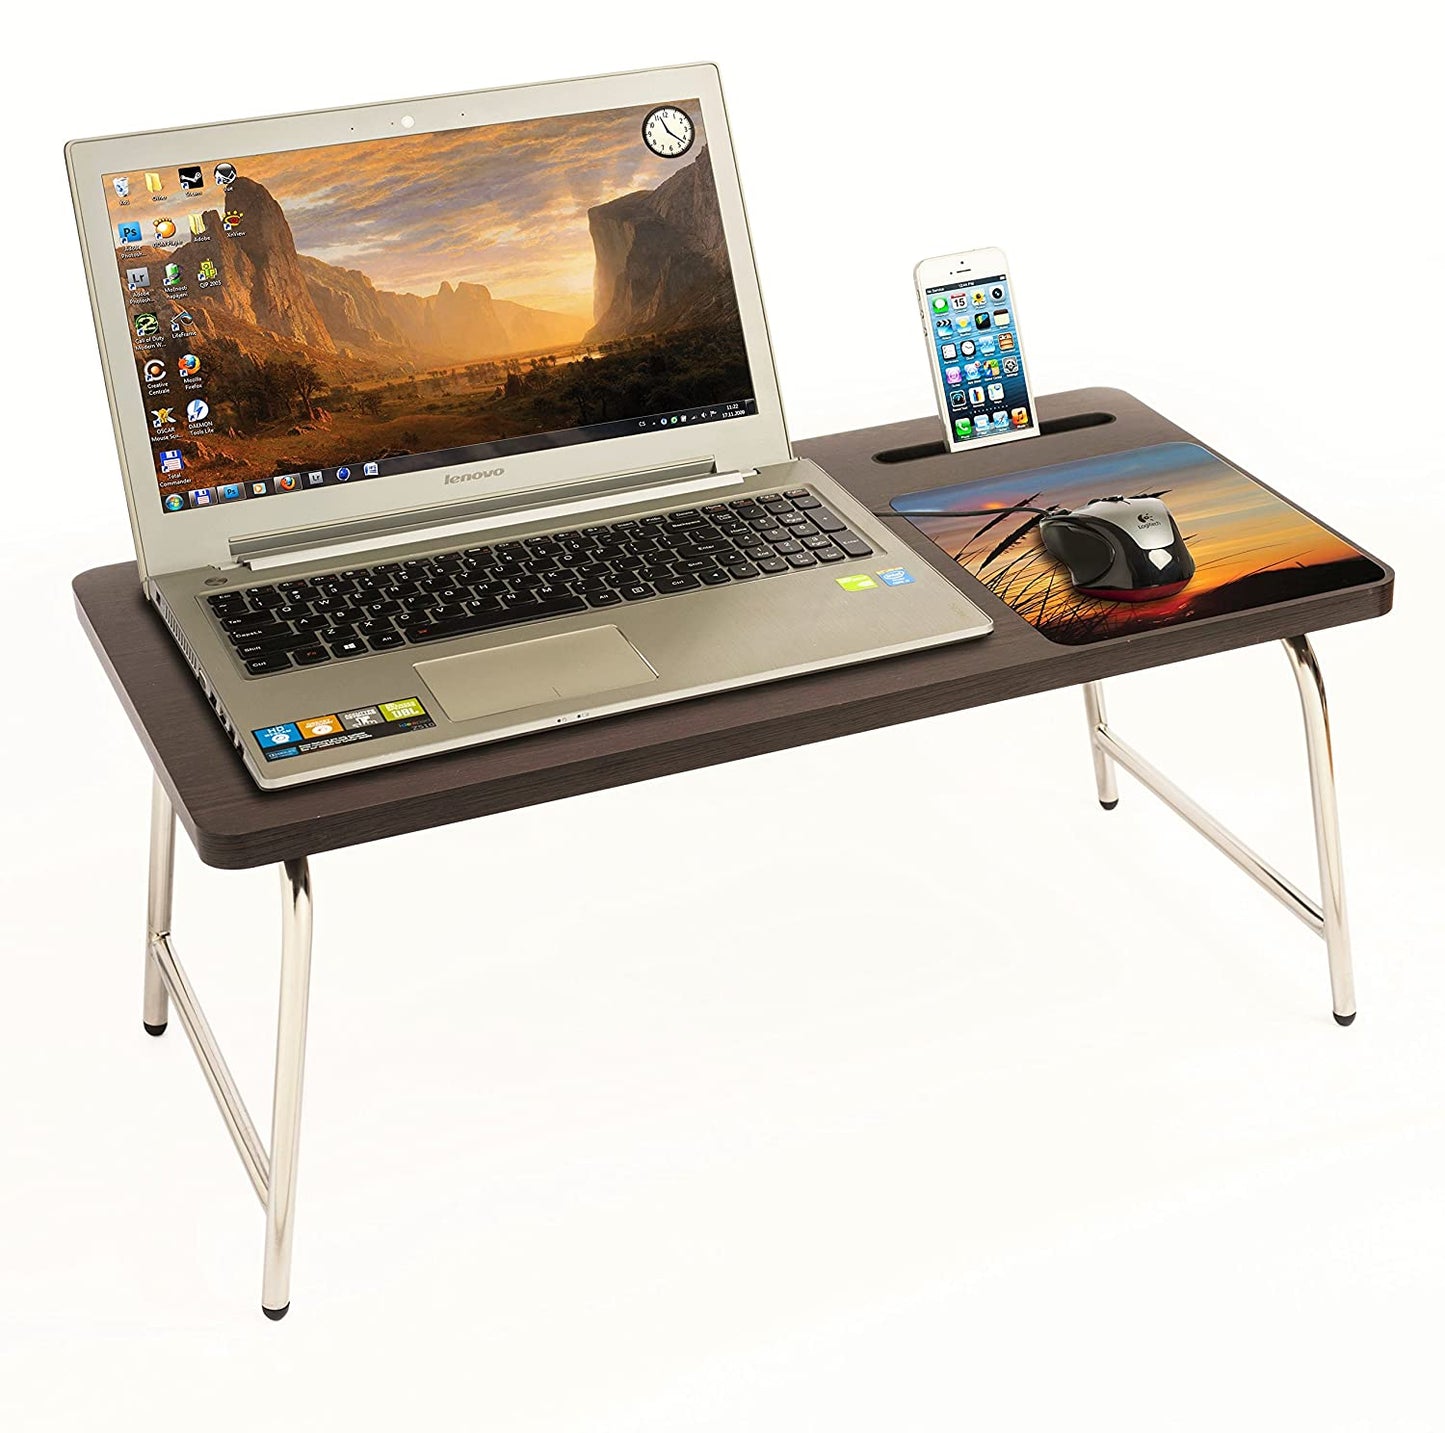 Study Table: Rockdesk Bed Laptop Table